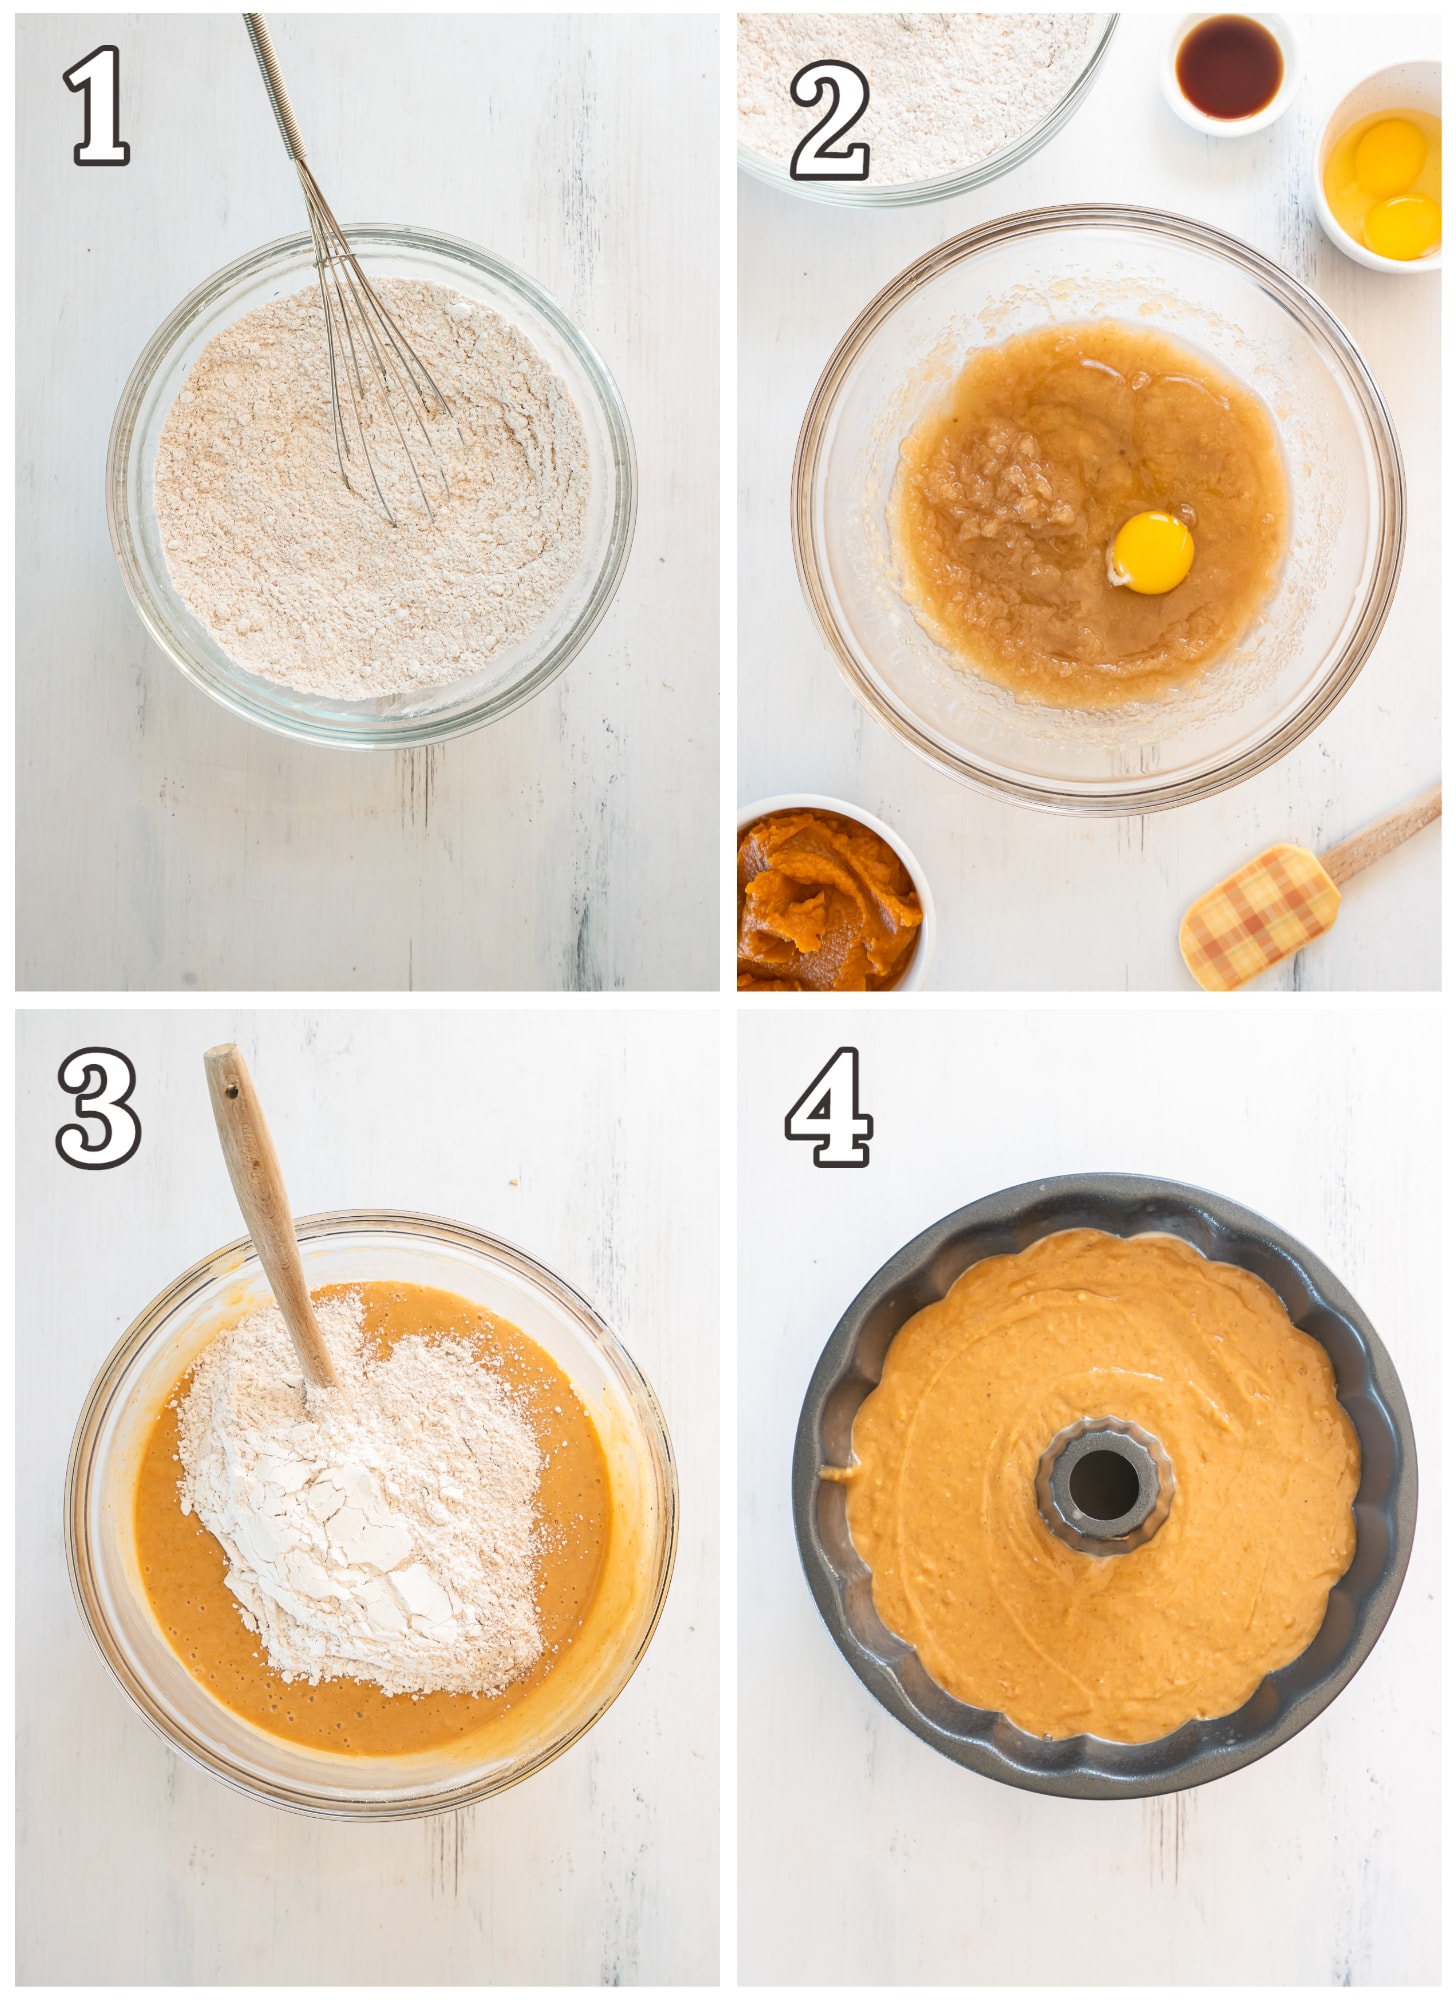 photo collage demonstrating how to make pumpkin bundt cake in a mixing bowl and bundt cake pan